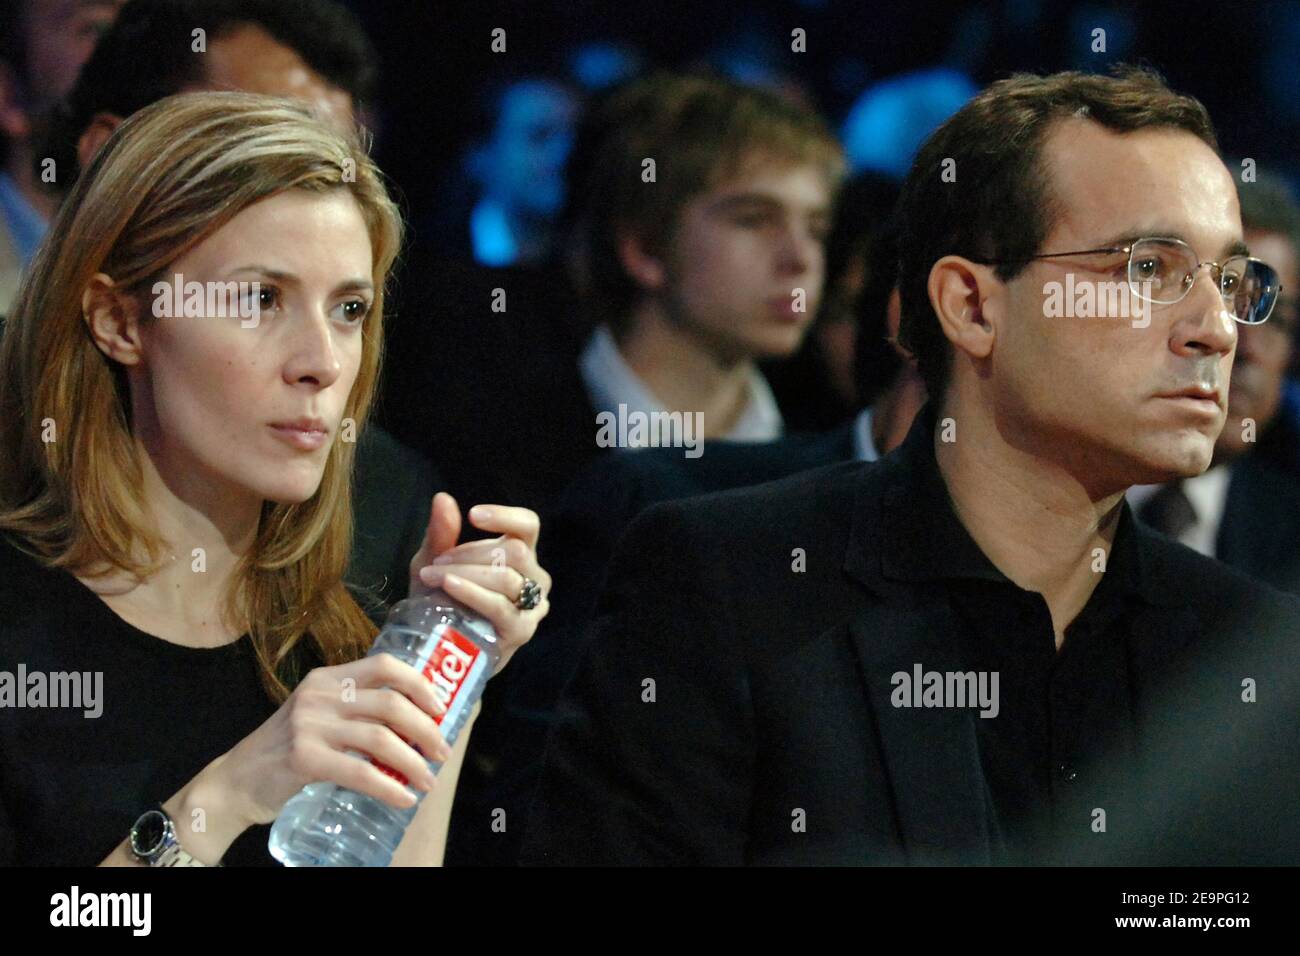 French TV anchor Jean-Luc Delarue and his girlfriend Elisabeth Bost attend  the WBA international light flyweigh at the Palais Omnisports Paris-Bercy  in Paris, France on December 2, 2006. Photo by Nicolas  Gouhier/Cameleon/ABACAPRESS.COM